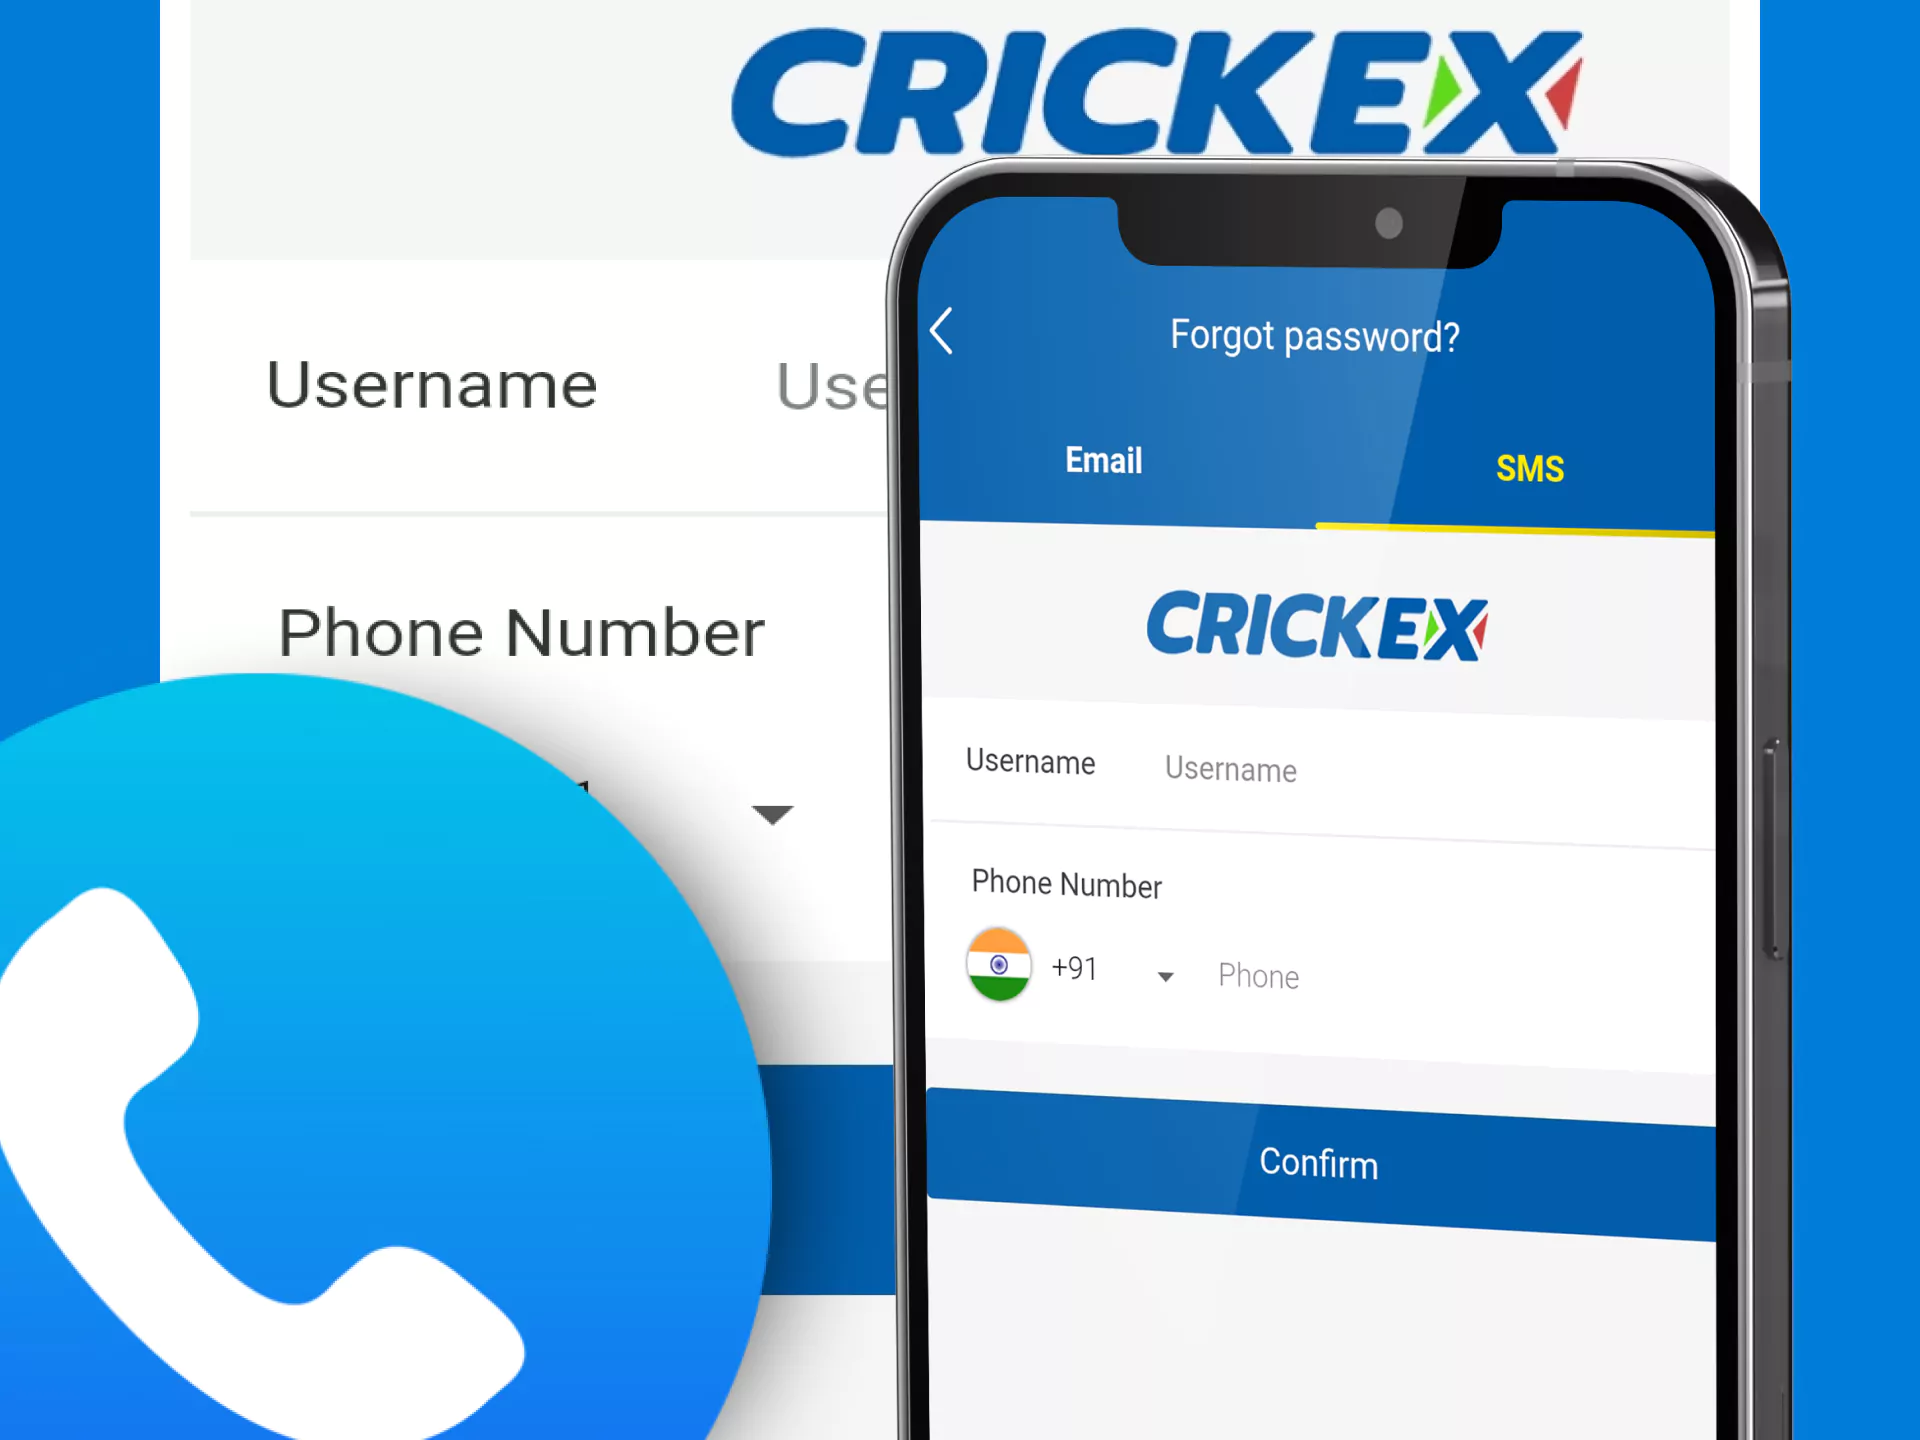 You can restore access to your Crickex account via phone number.